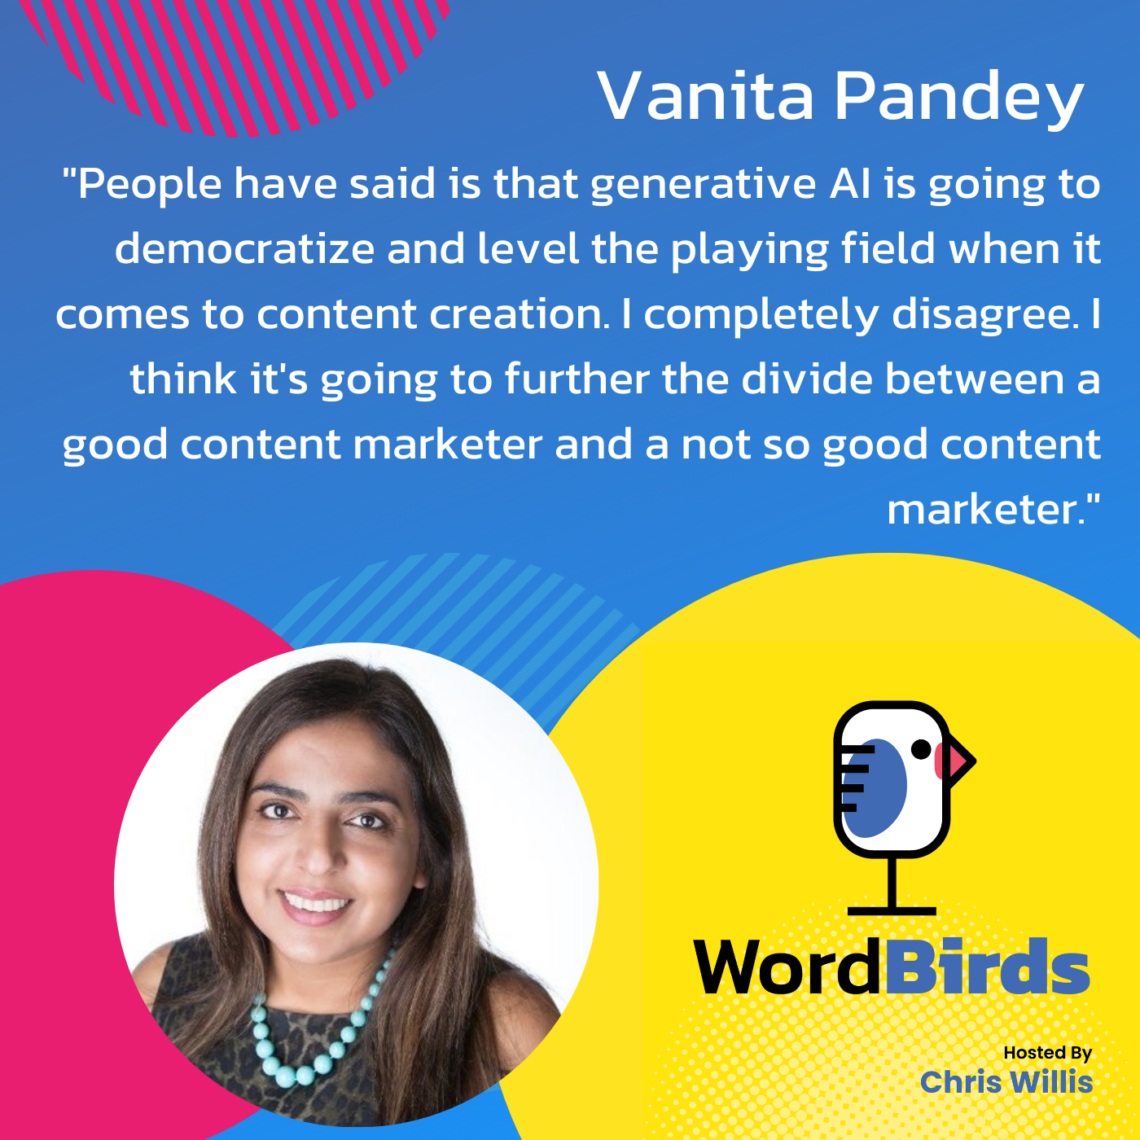 On a blue background there's a quote from Vanita Pandey in white that takes up the majority of the image. The bottom of the image has a headshot image of Vanita and the WordBirds Podcast logo.